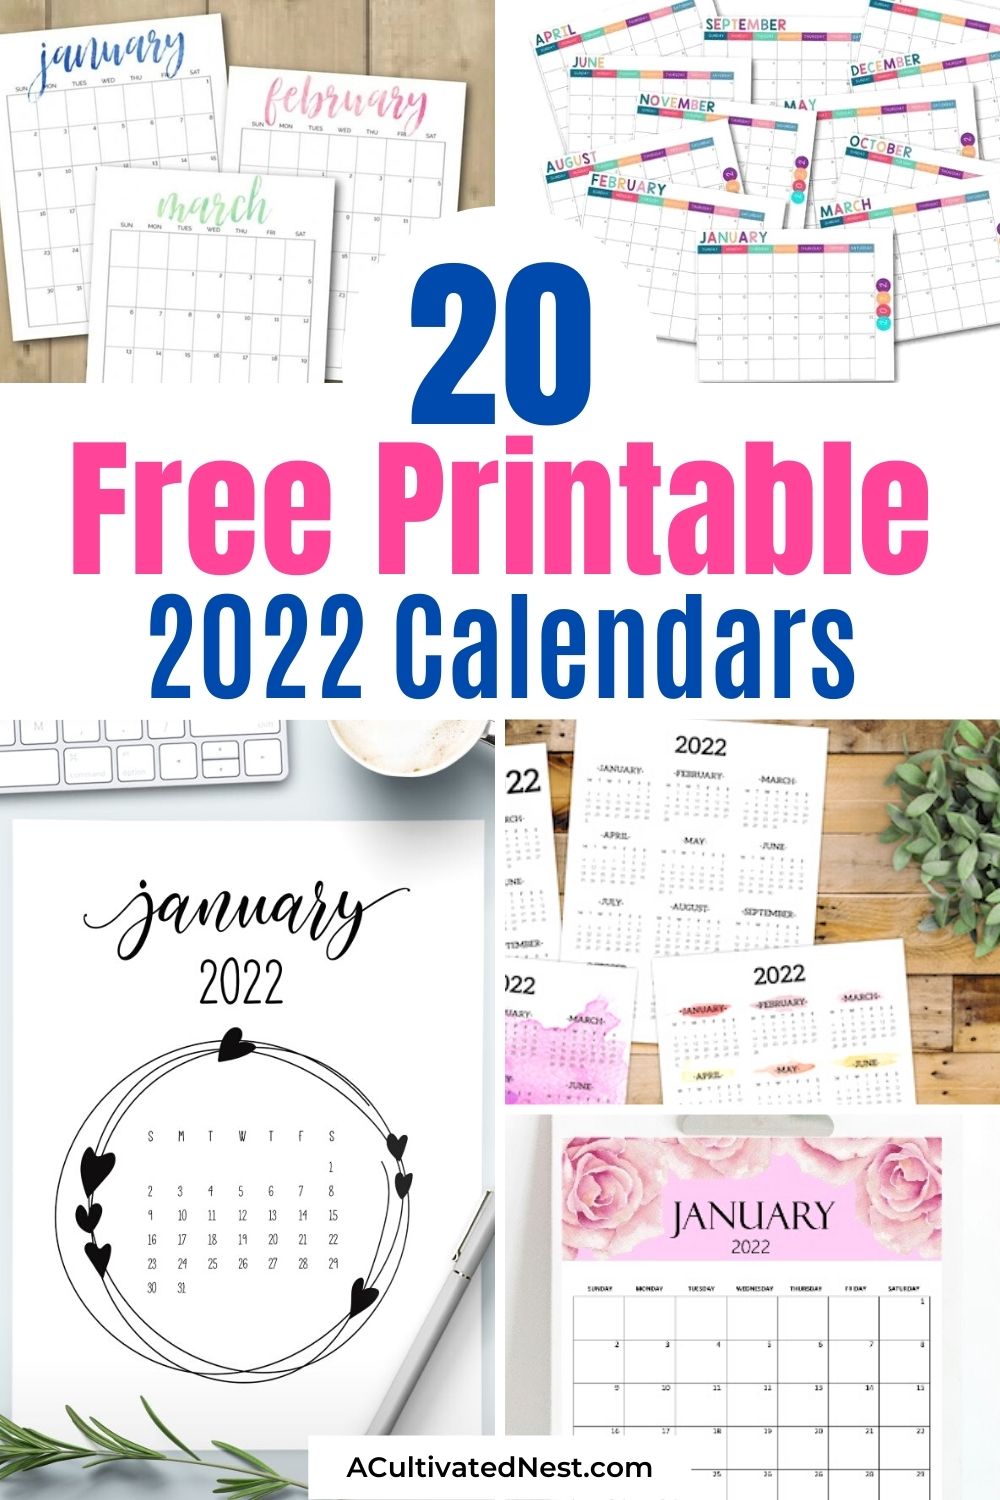 20 Handy Free Printable 2022 Calendars- It's easy to get ready and organized for 2022 with help from these beautiful and helpful free printable 2022 calendars! | #2022CalendarPrintables #freePrintables #printableCalendars #freeCalendars #ACultivatedNest